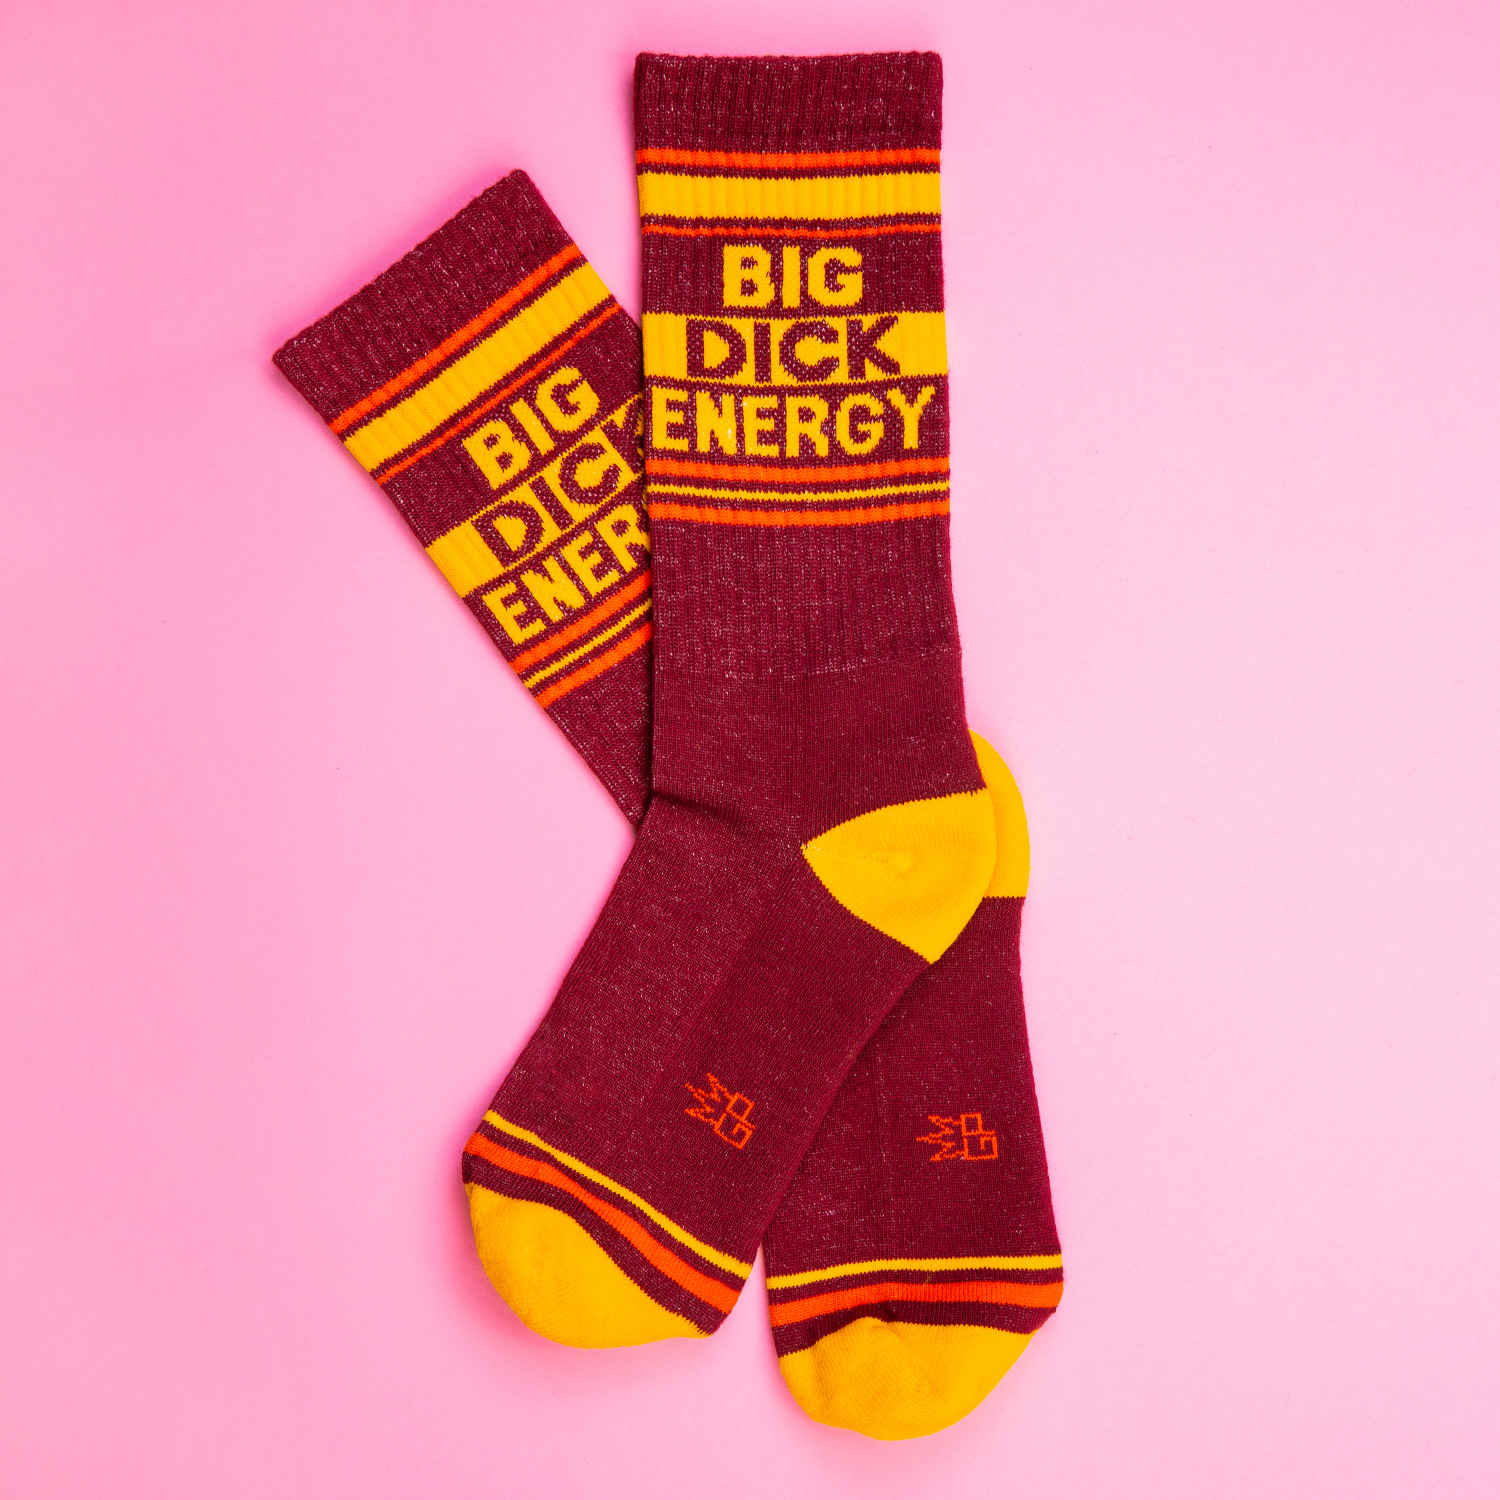 A pair of burgundy and yellow crew socks against a pink background that read "Big Dick Energy" with the Gumball Poodle logo along the arch.